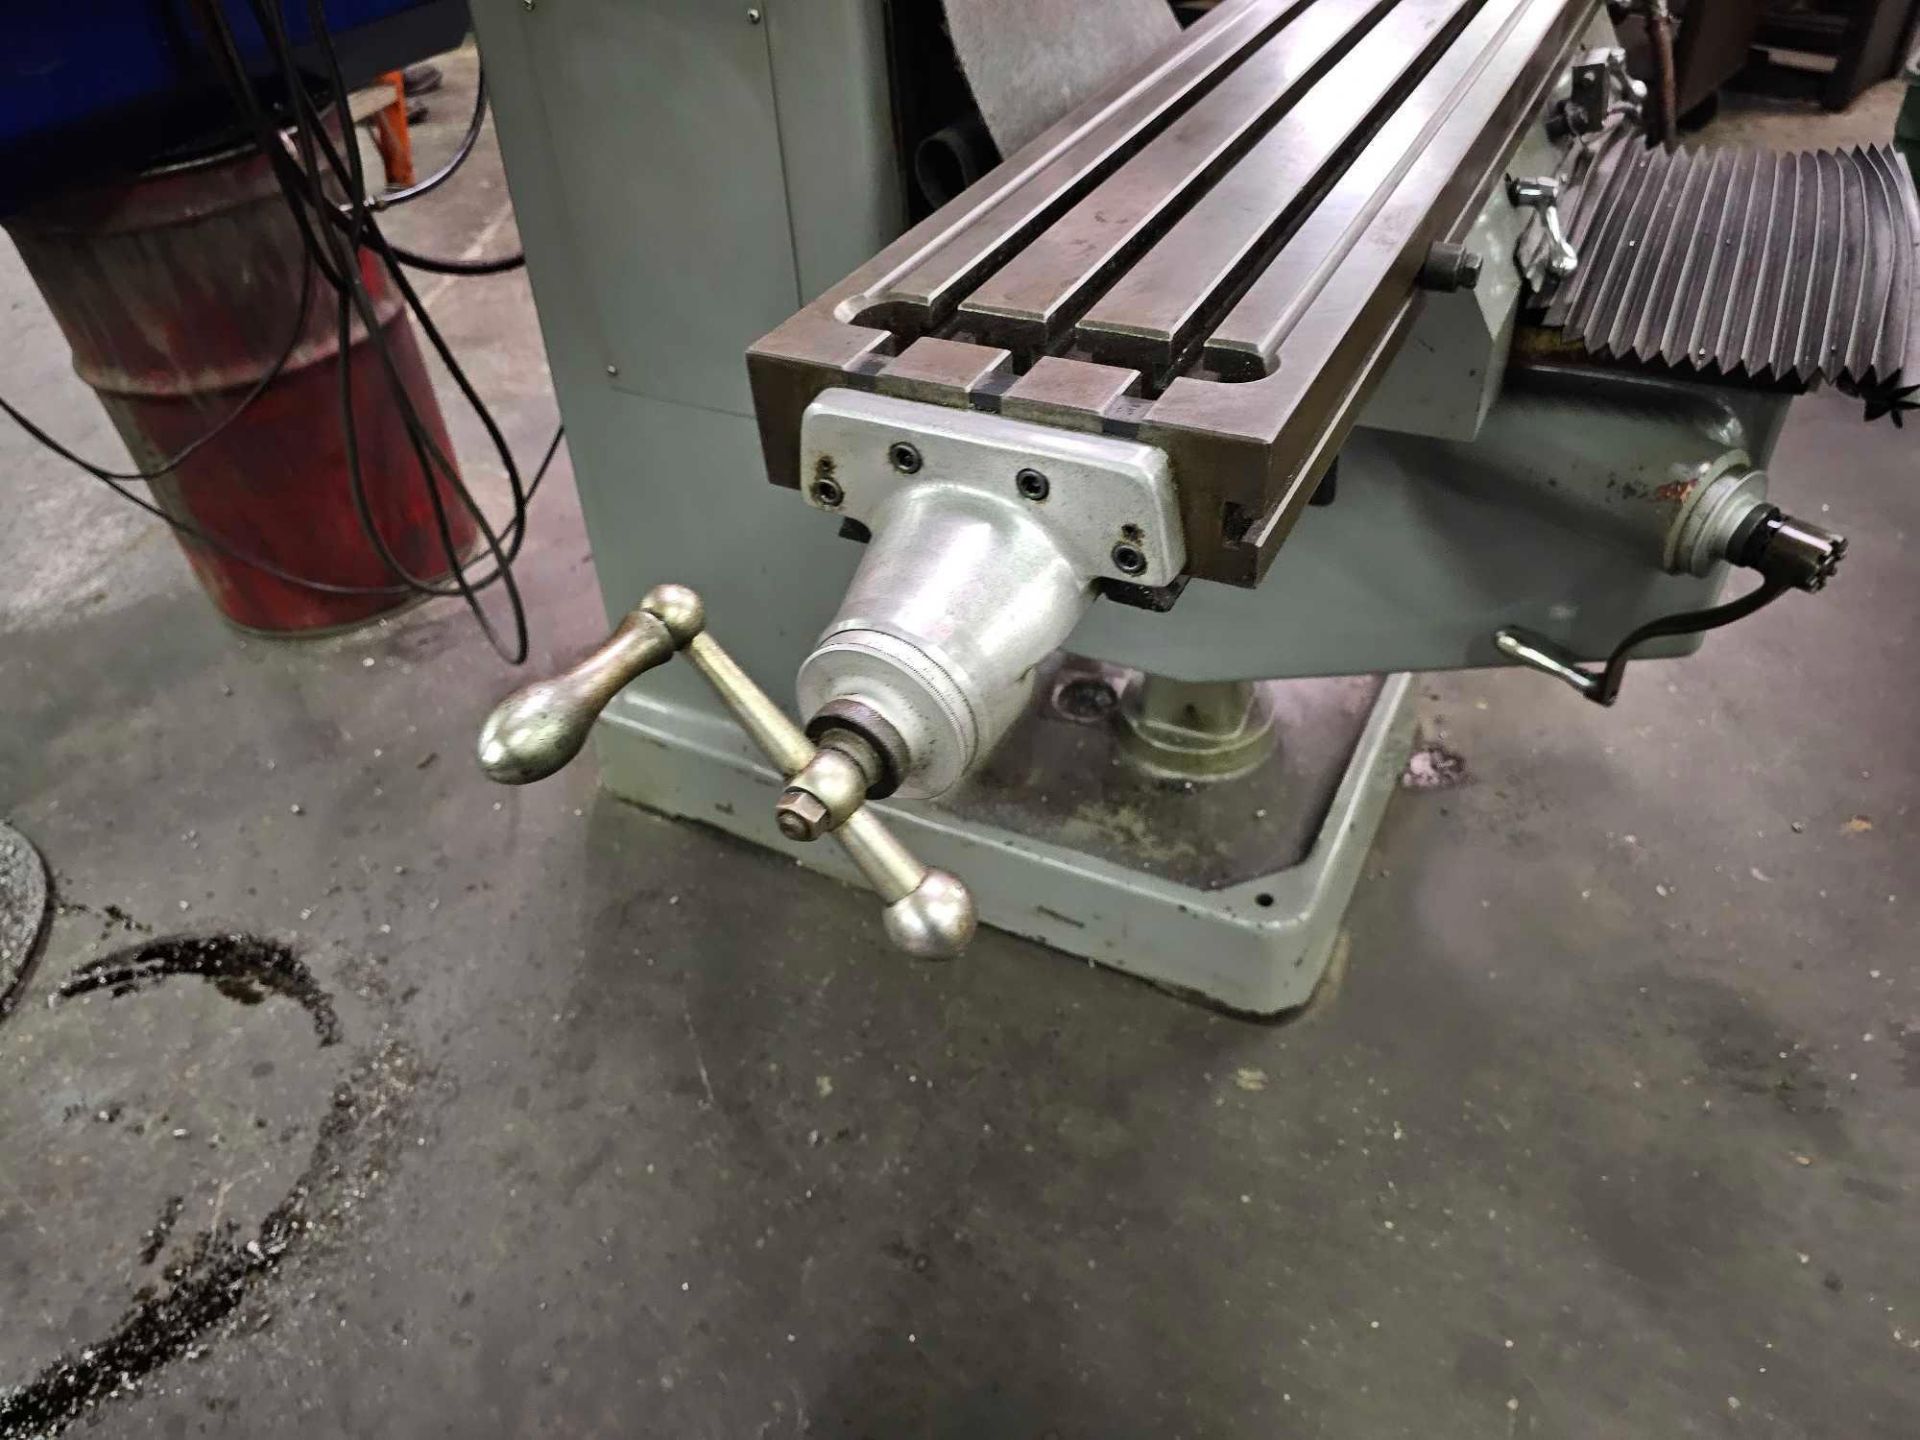 ALLIANT 10"X 50" KNEE MILL WITH DRO - Image 8 of 12